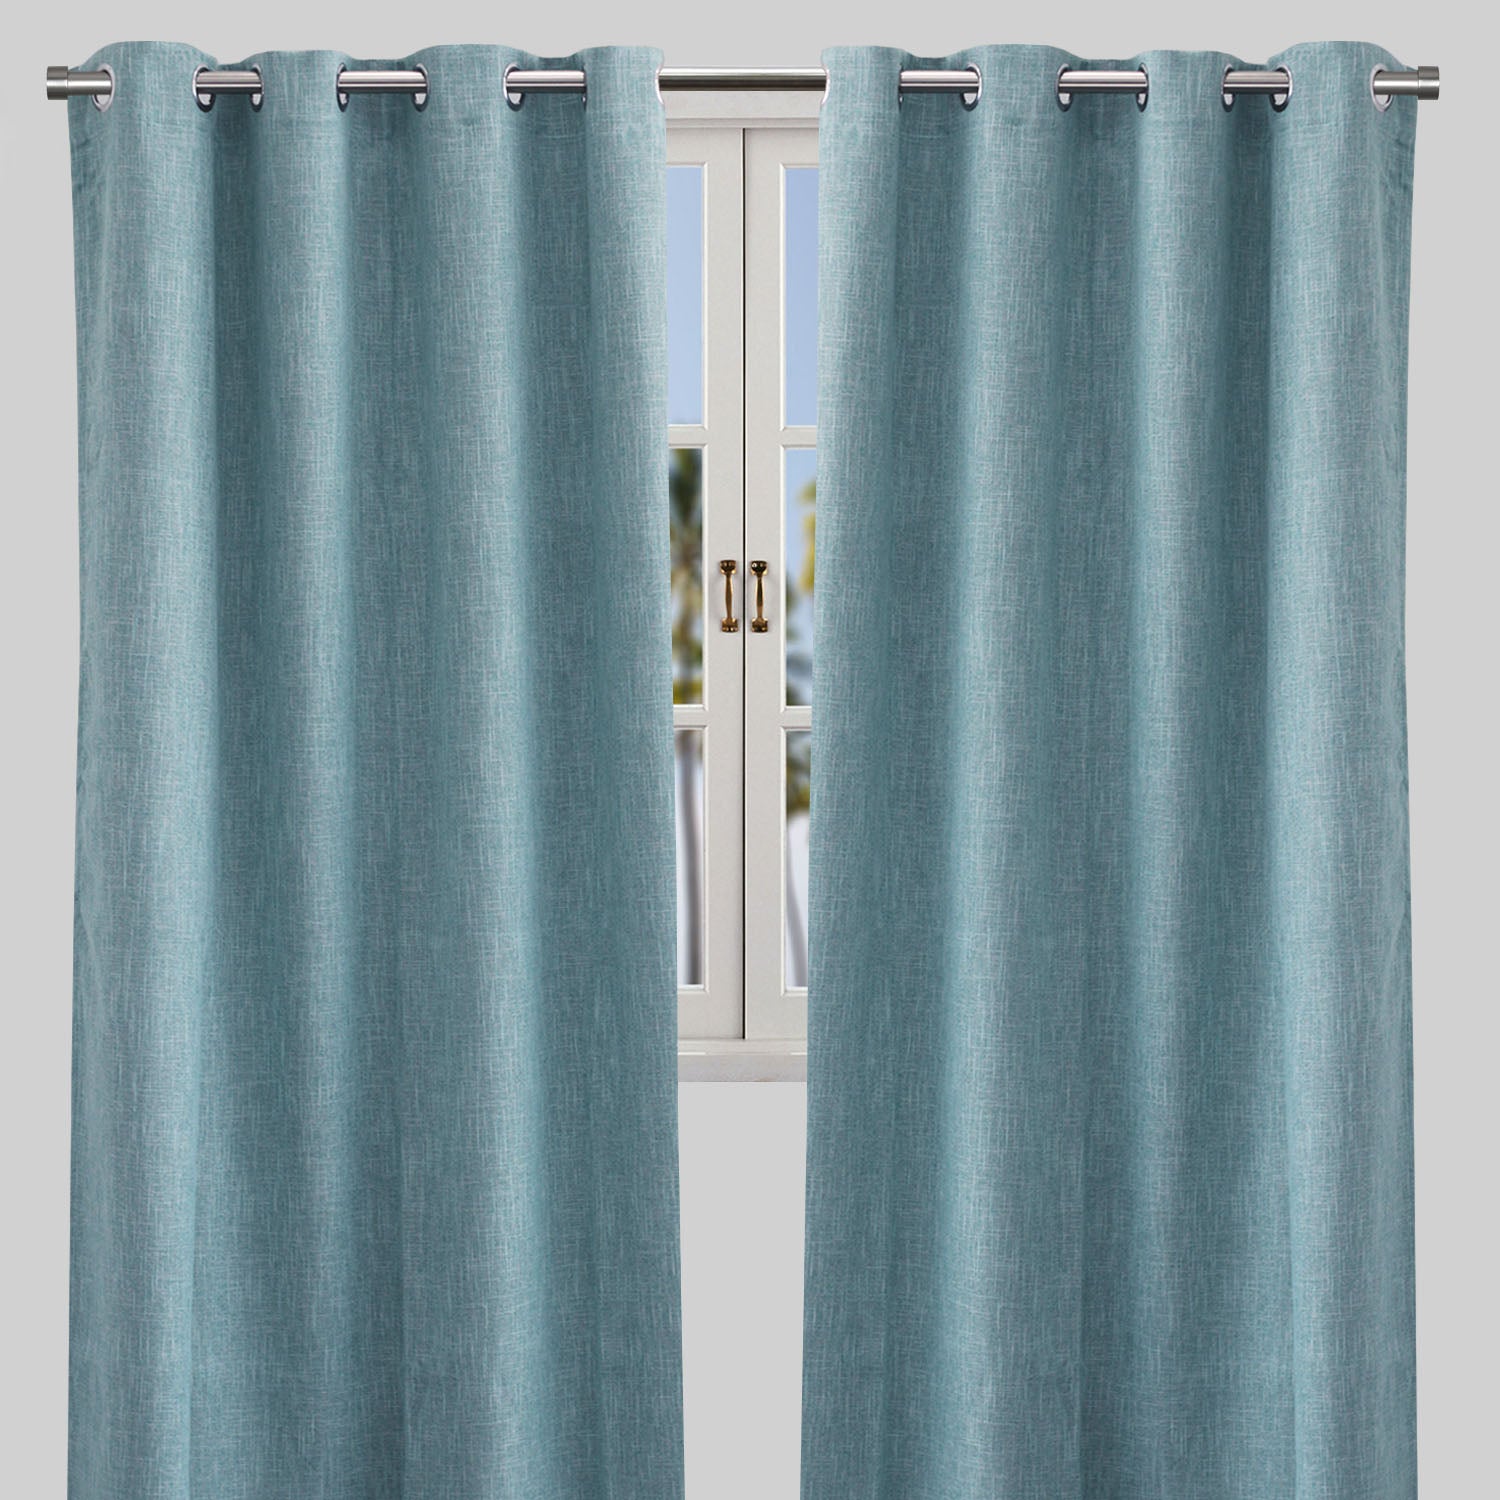 Colony Curtain Panels | Blackout